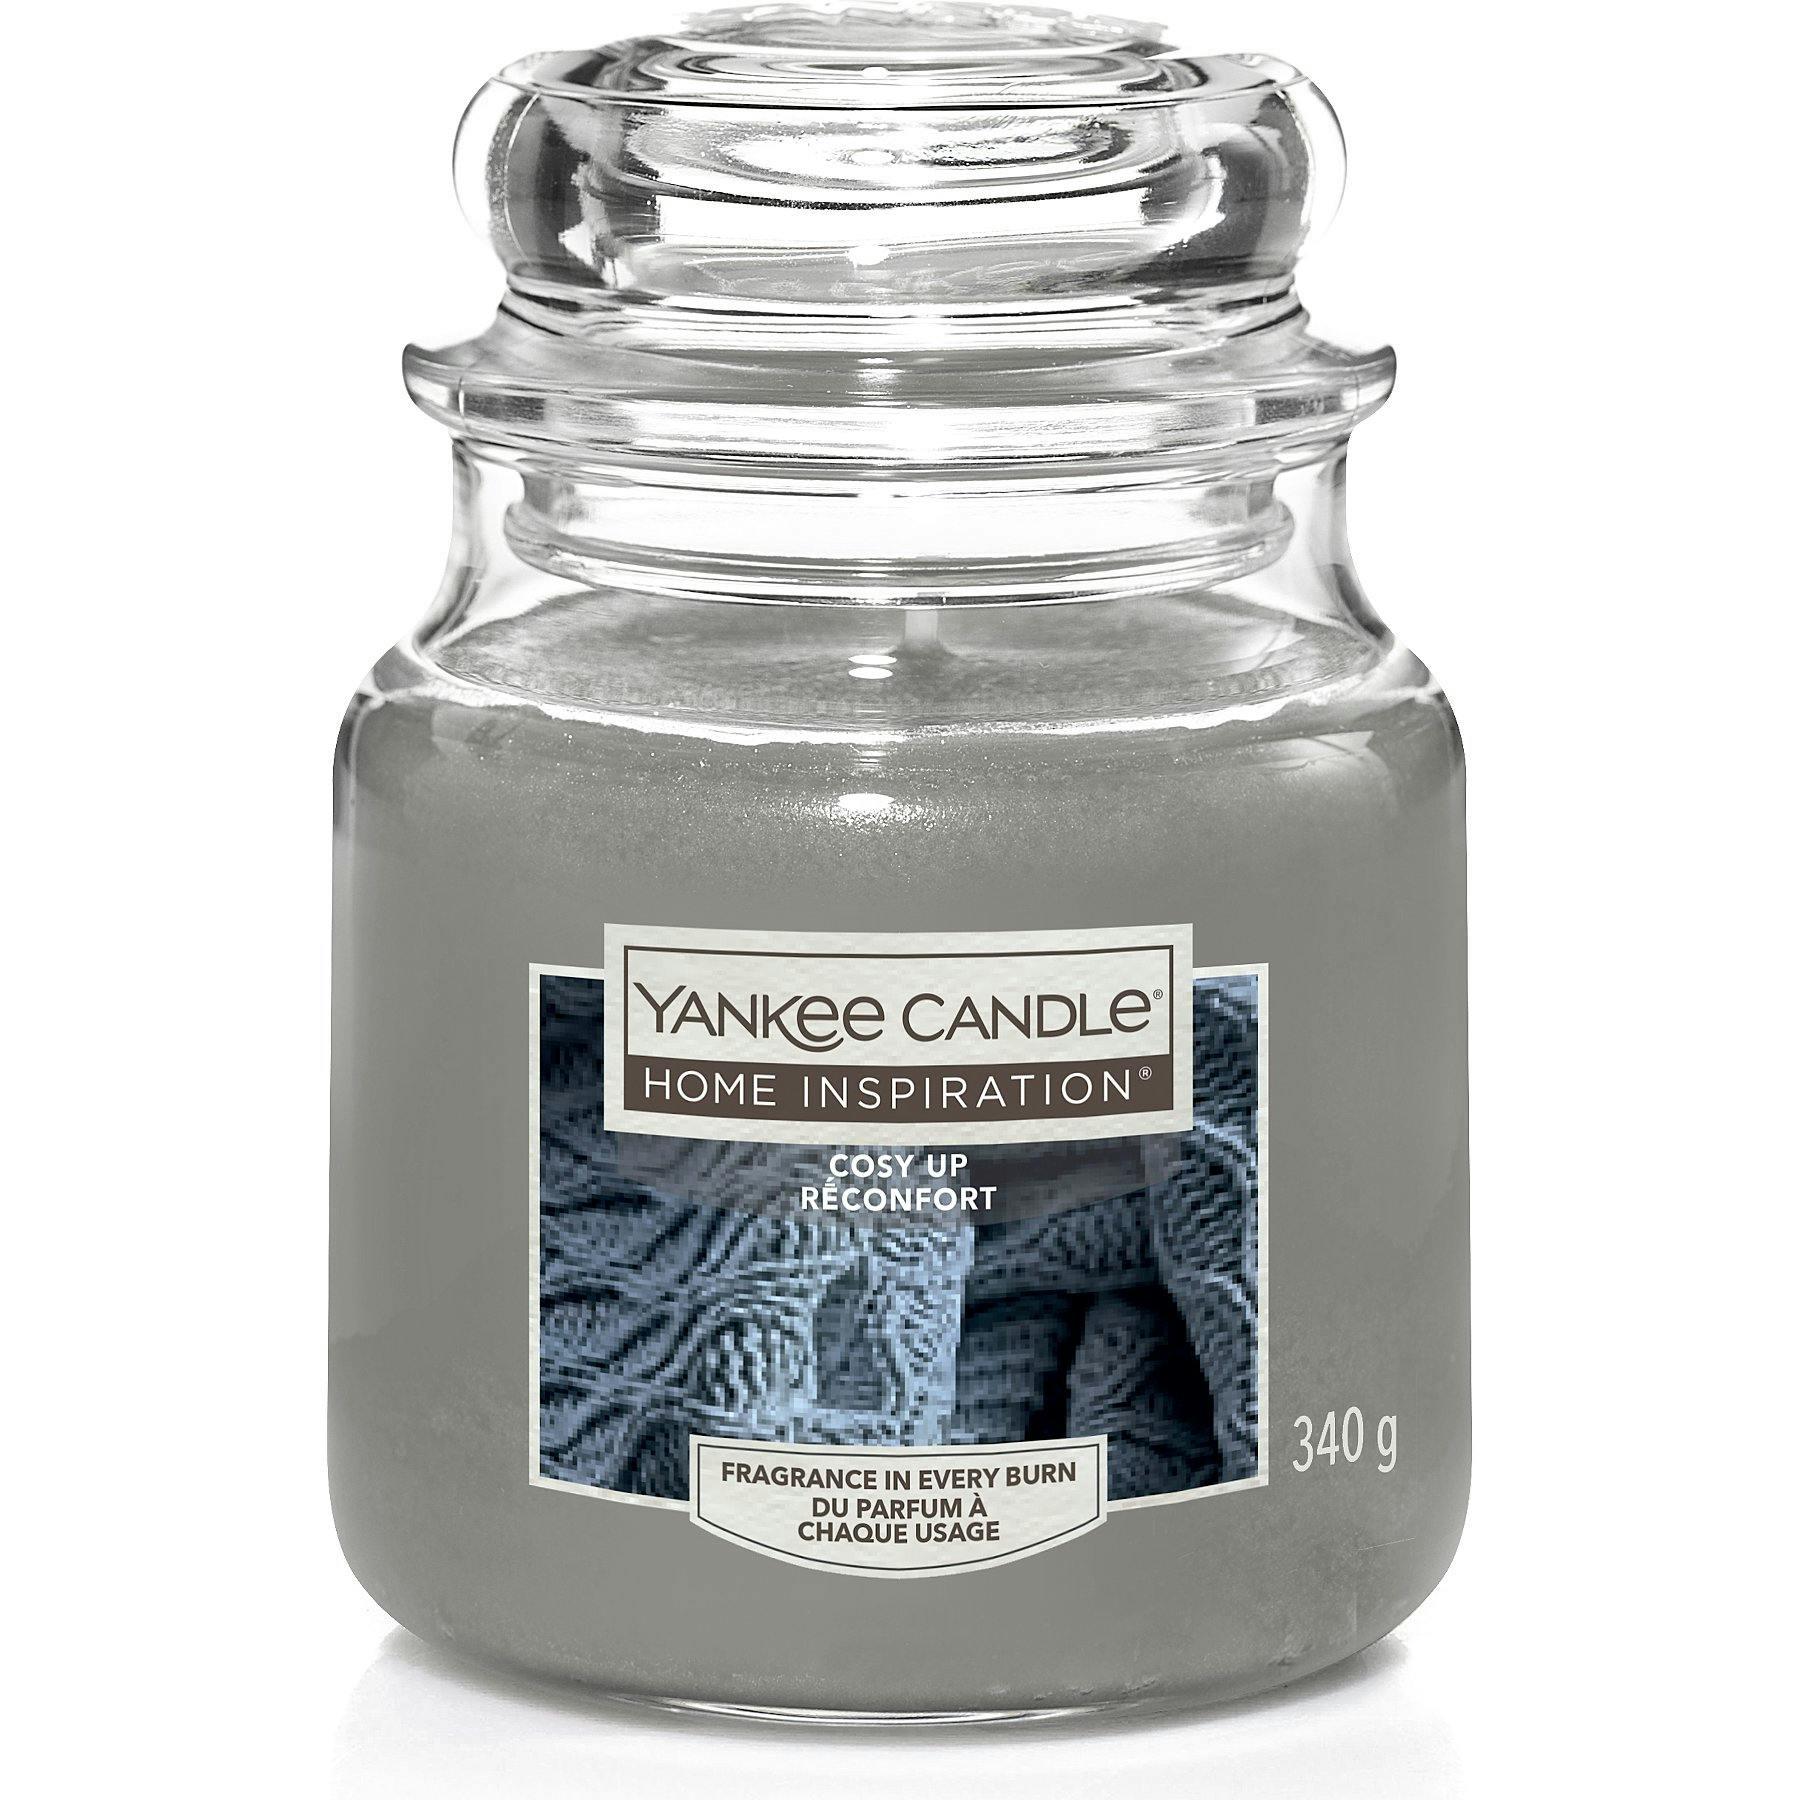 Yankee Candle Home Inspiration Duftkerze Cosy Up 340G